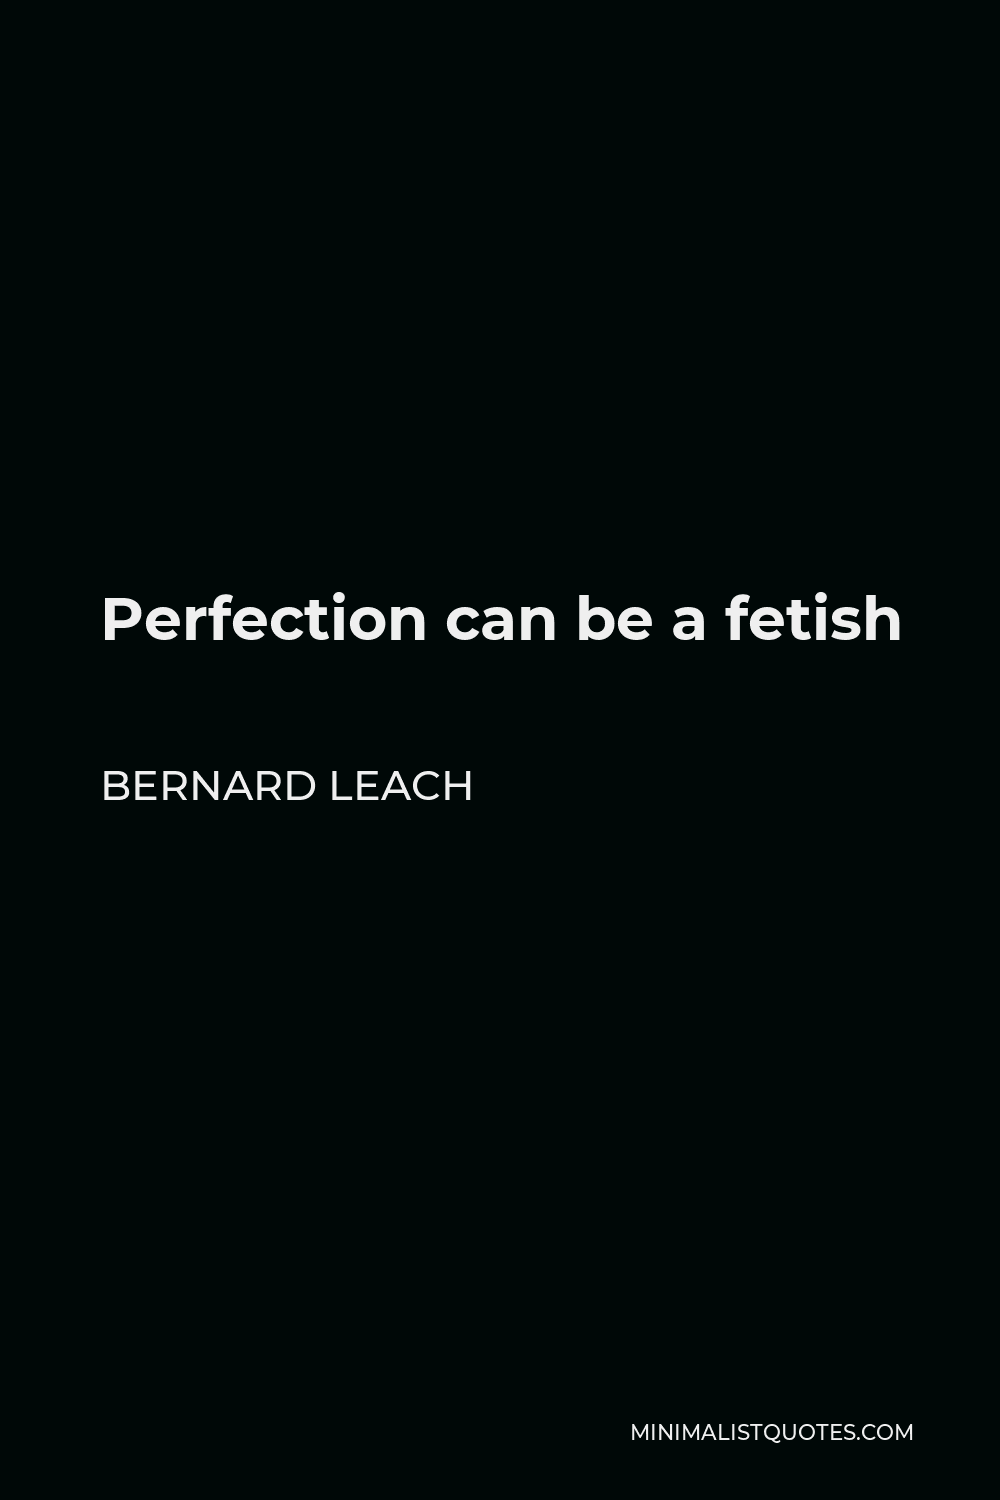 Bernard Leach Quote - Perfection can be a fetish